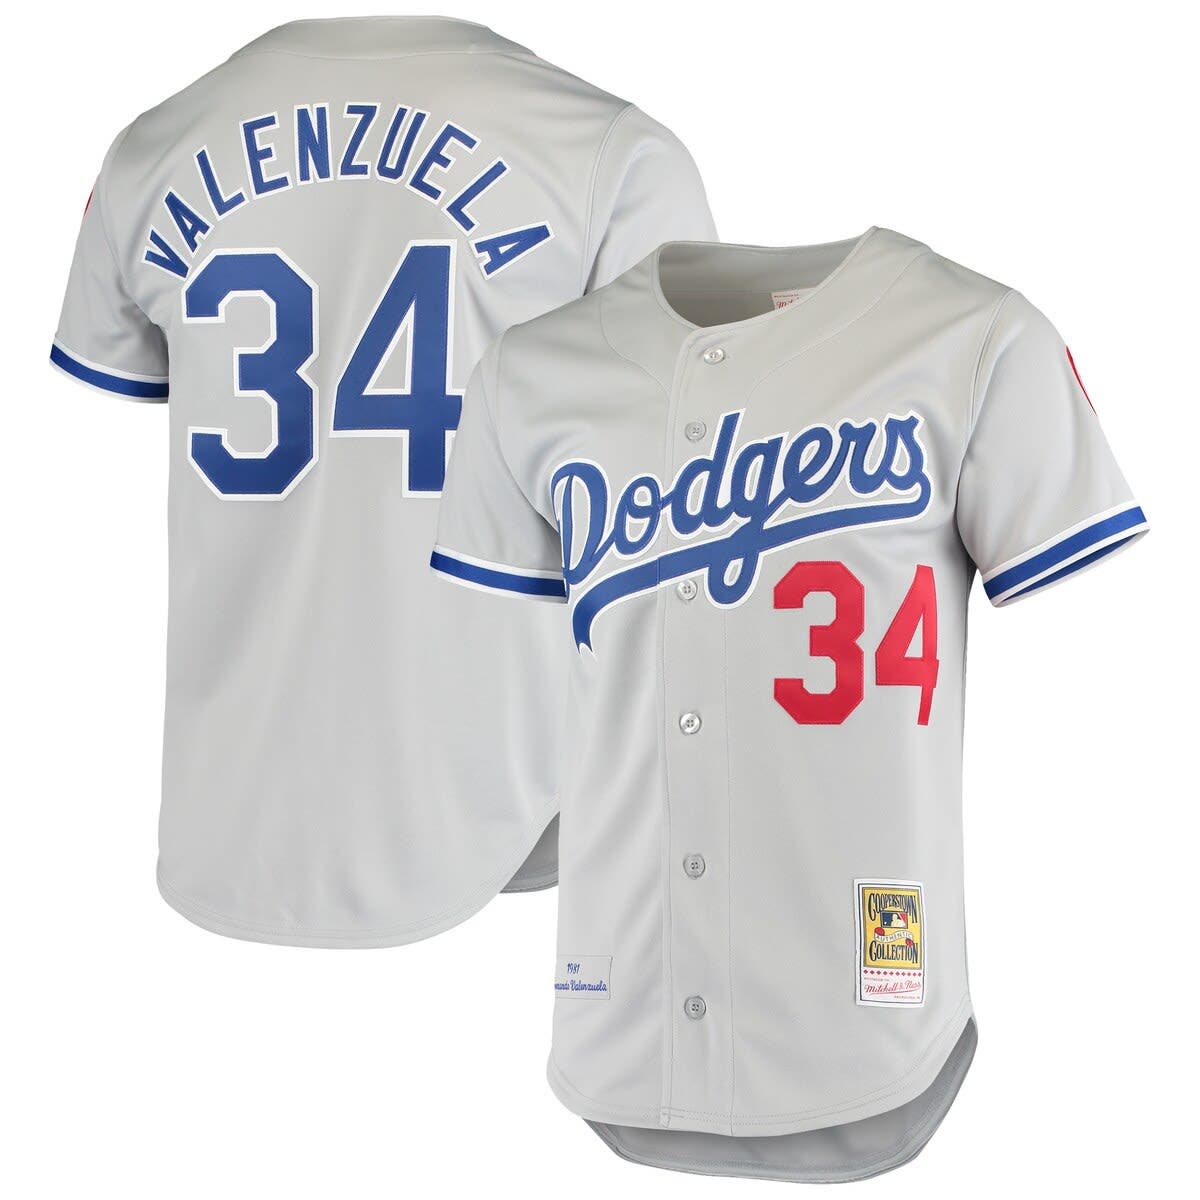 Dodgers Cooperstown Collection Custom Royal Mesh Batting Practice Jersey